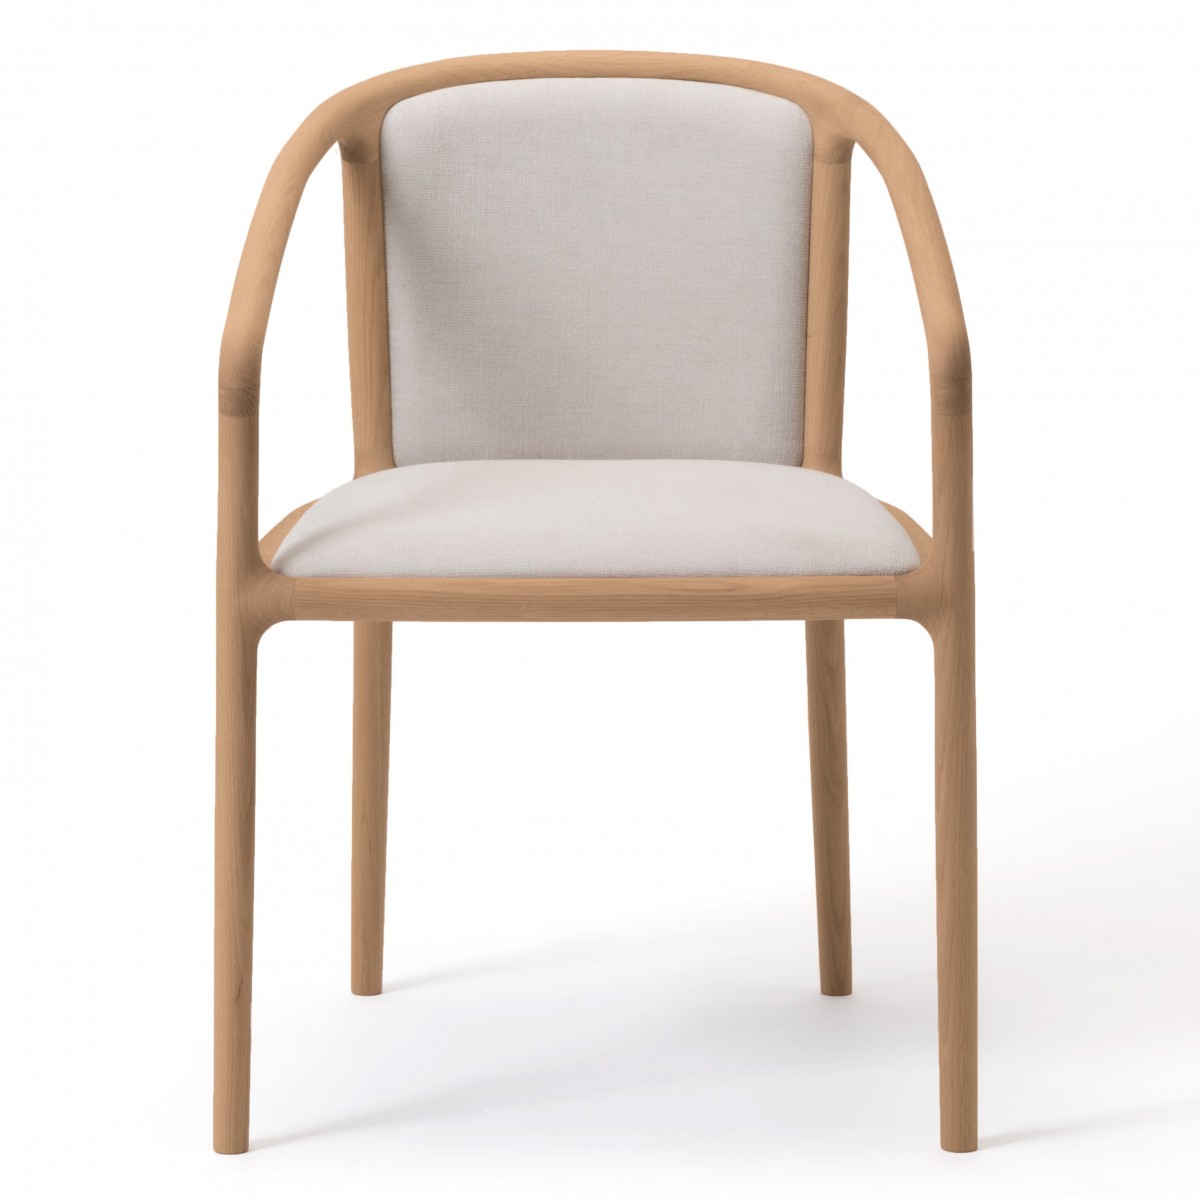 NF-DC01 Dining Chair